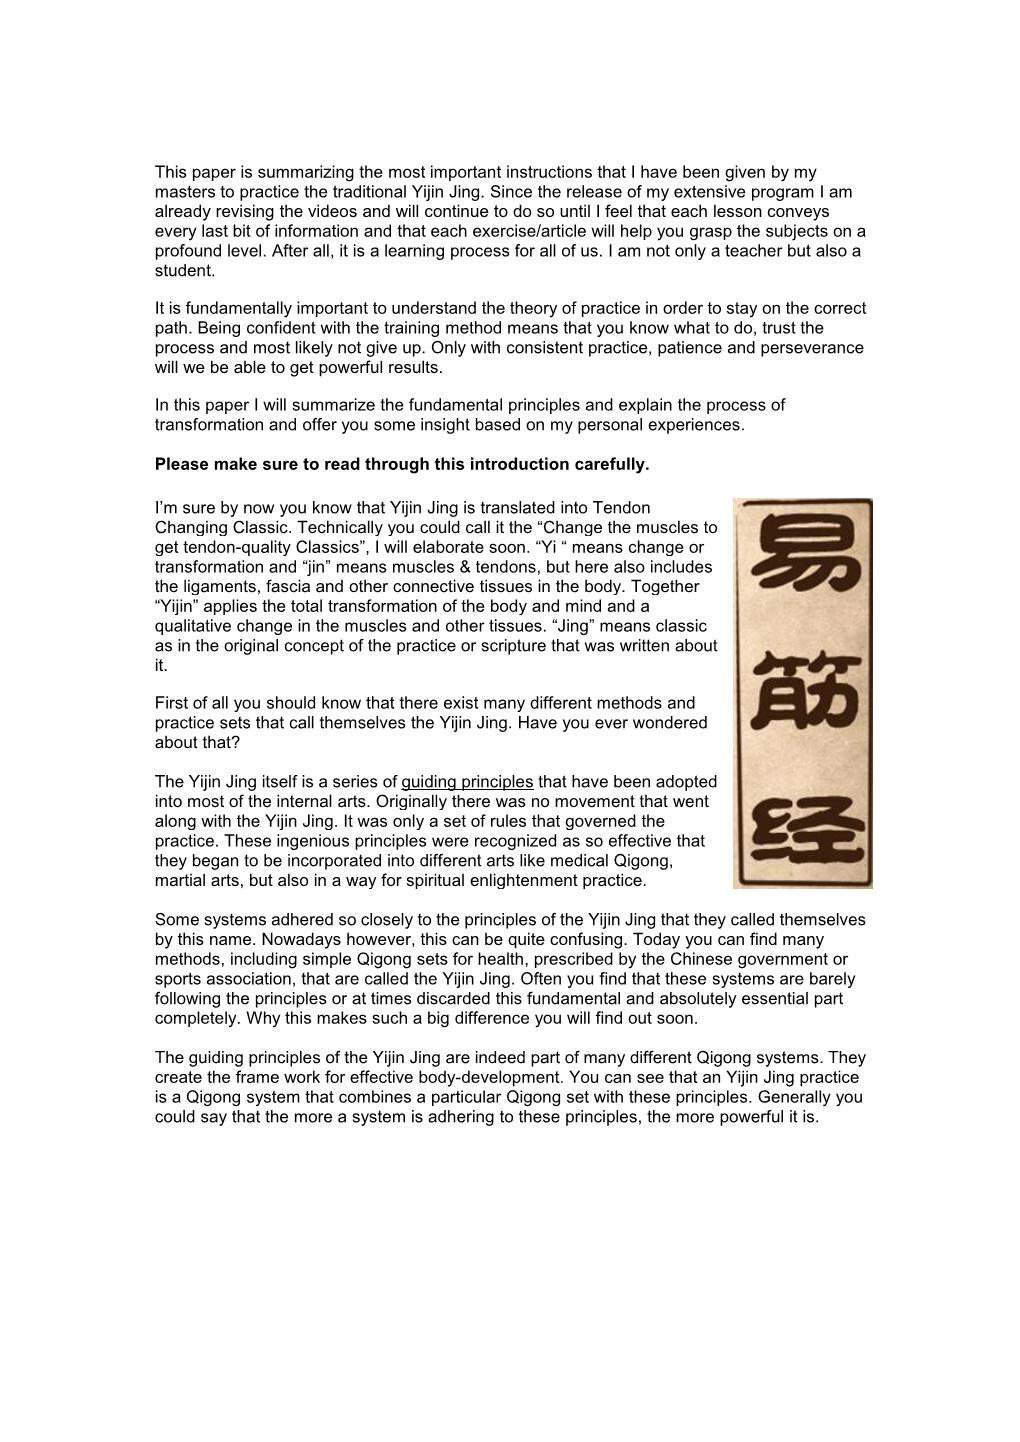 This Paper Is Summarizing the Most Important Instructions That I Have Been Given by My Masters to Practice the Traditional Yijin Jing